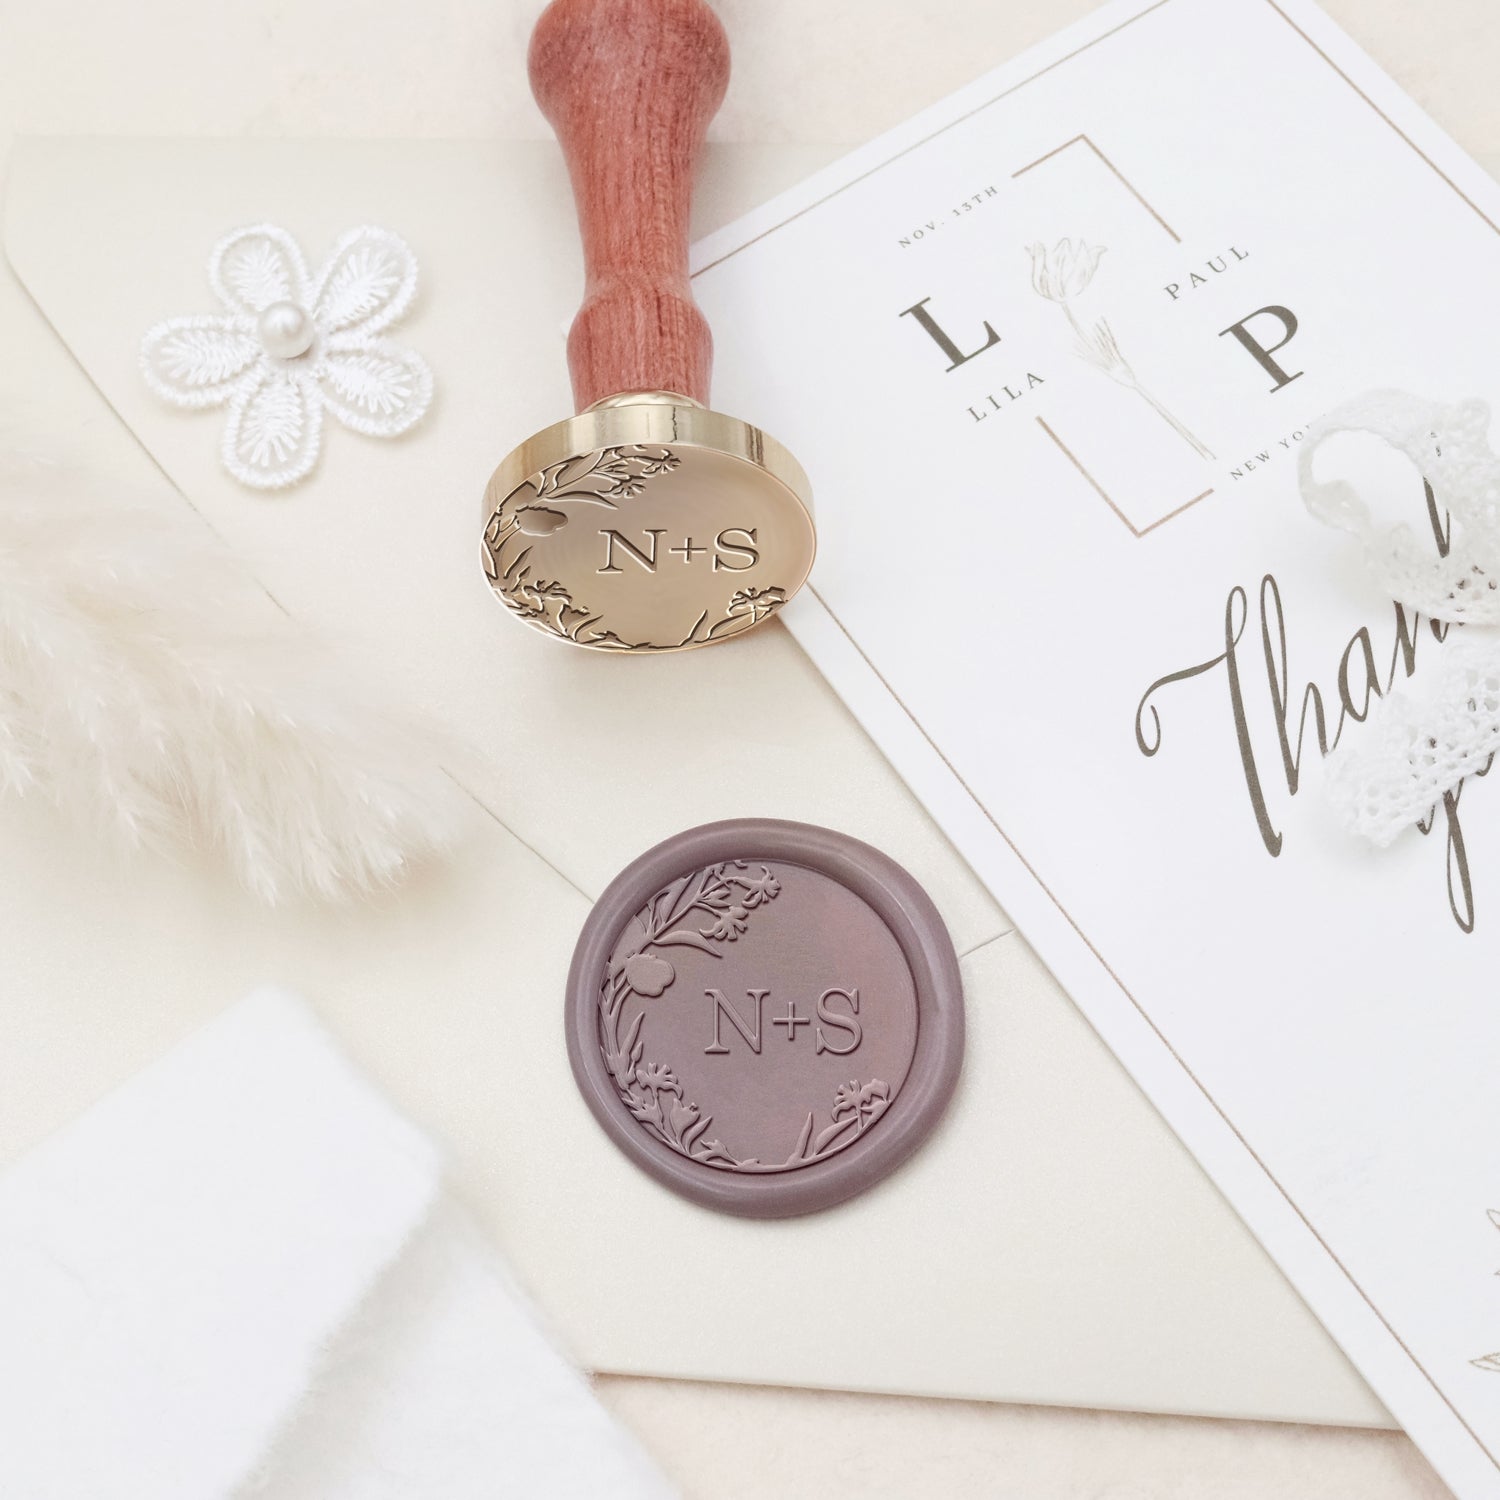 Botanical wreath wedding invitation stamp, Personalized stamp wedding –  Japanese Rubber Stamps